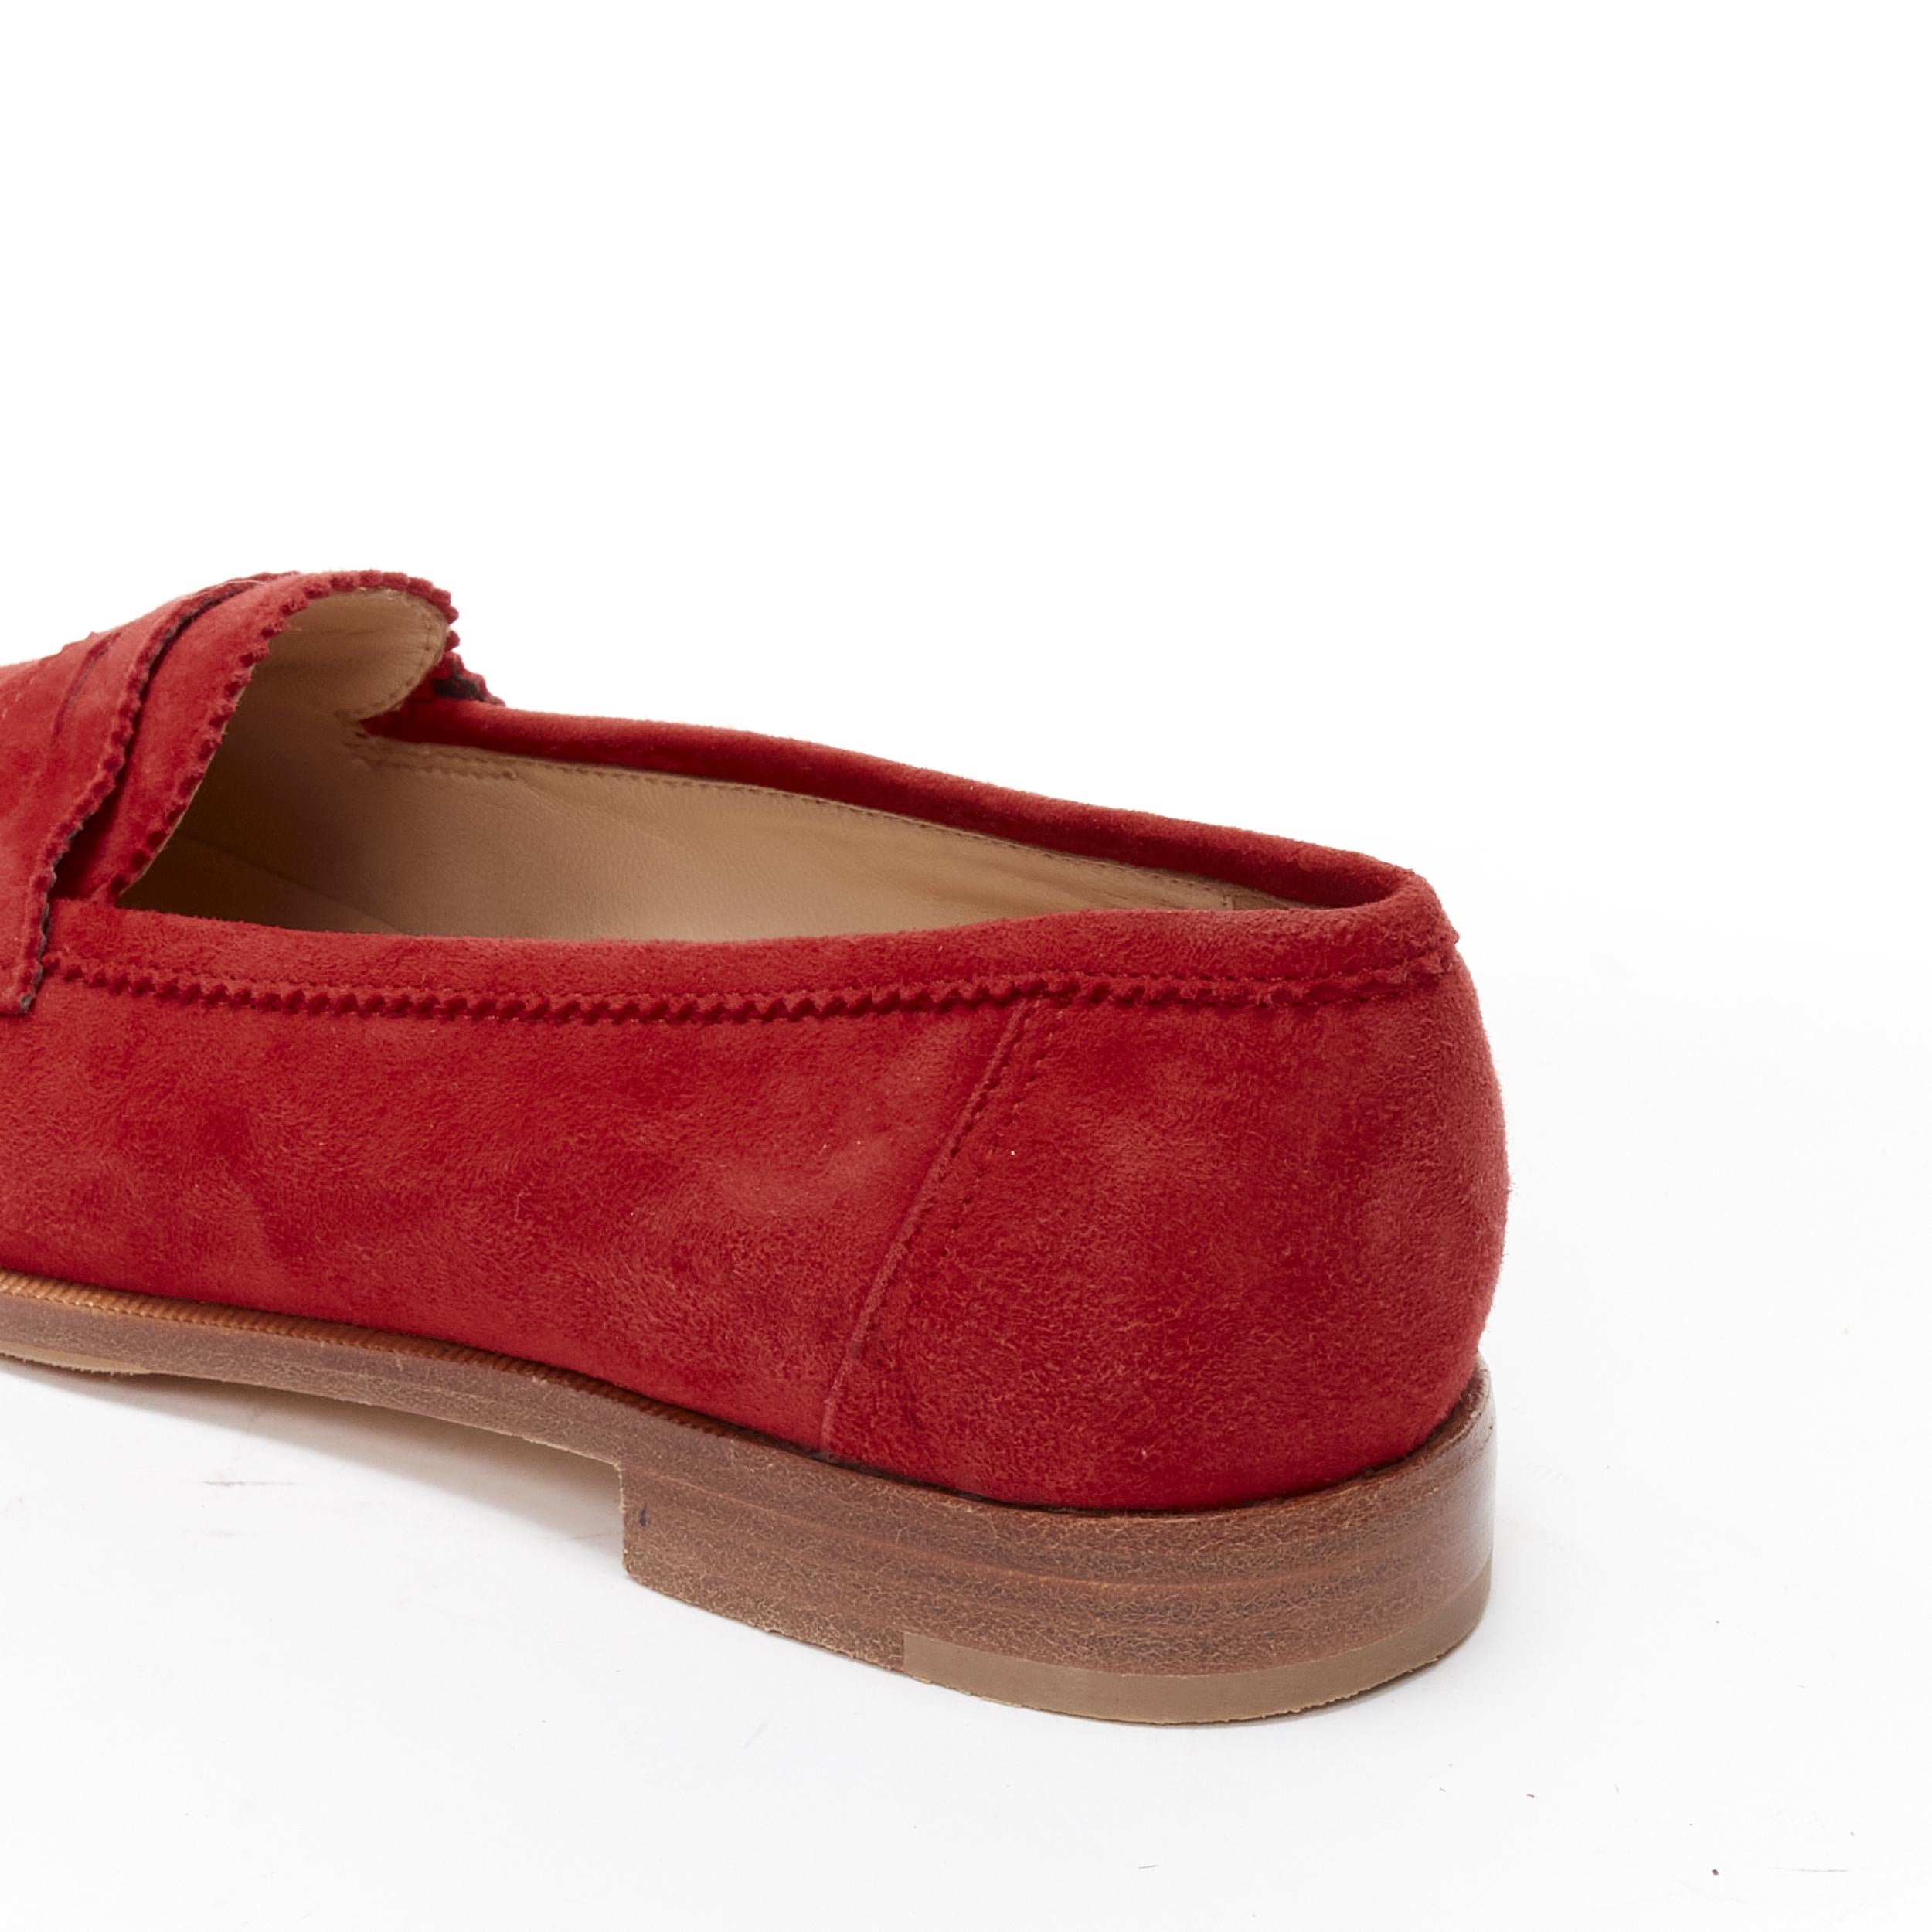 MANOLO BLAHNIK red suede leather classic penny loafer EU37 For Sale 3